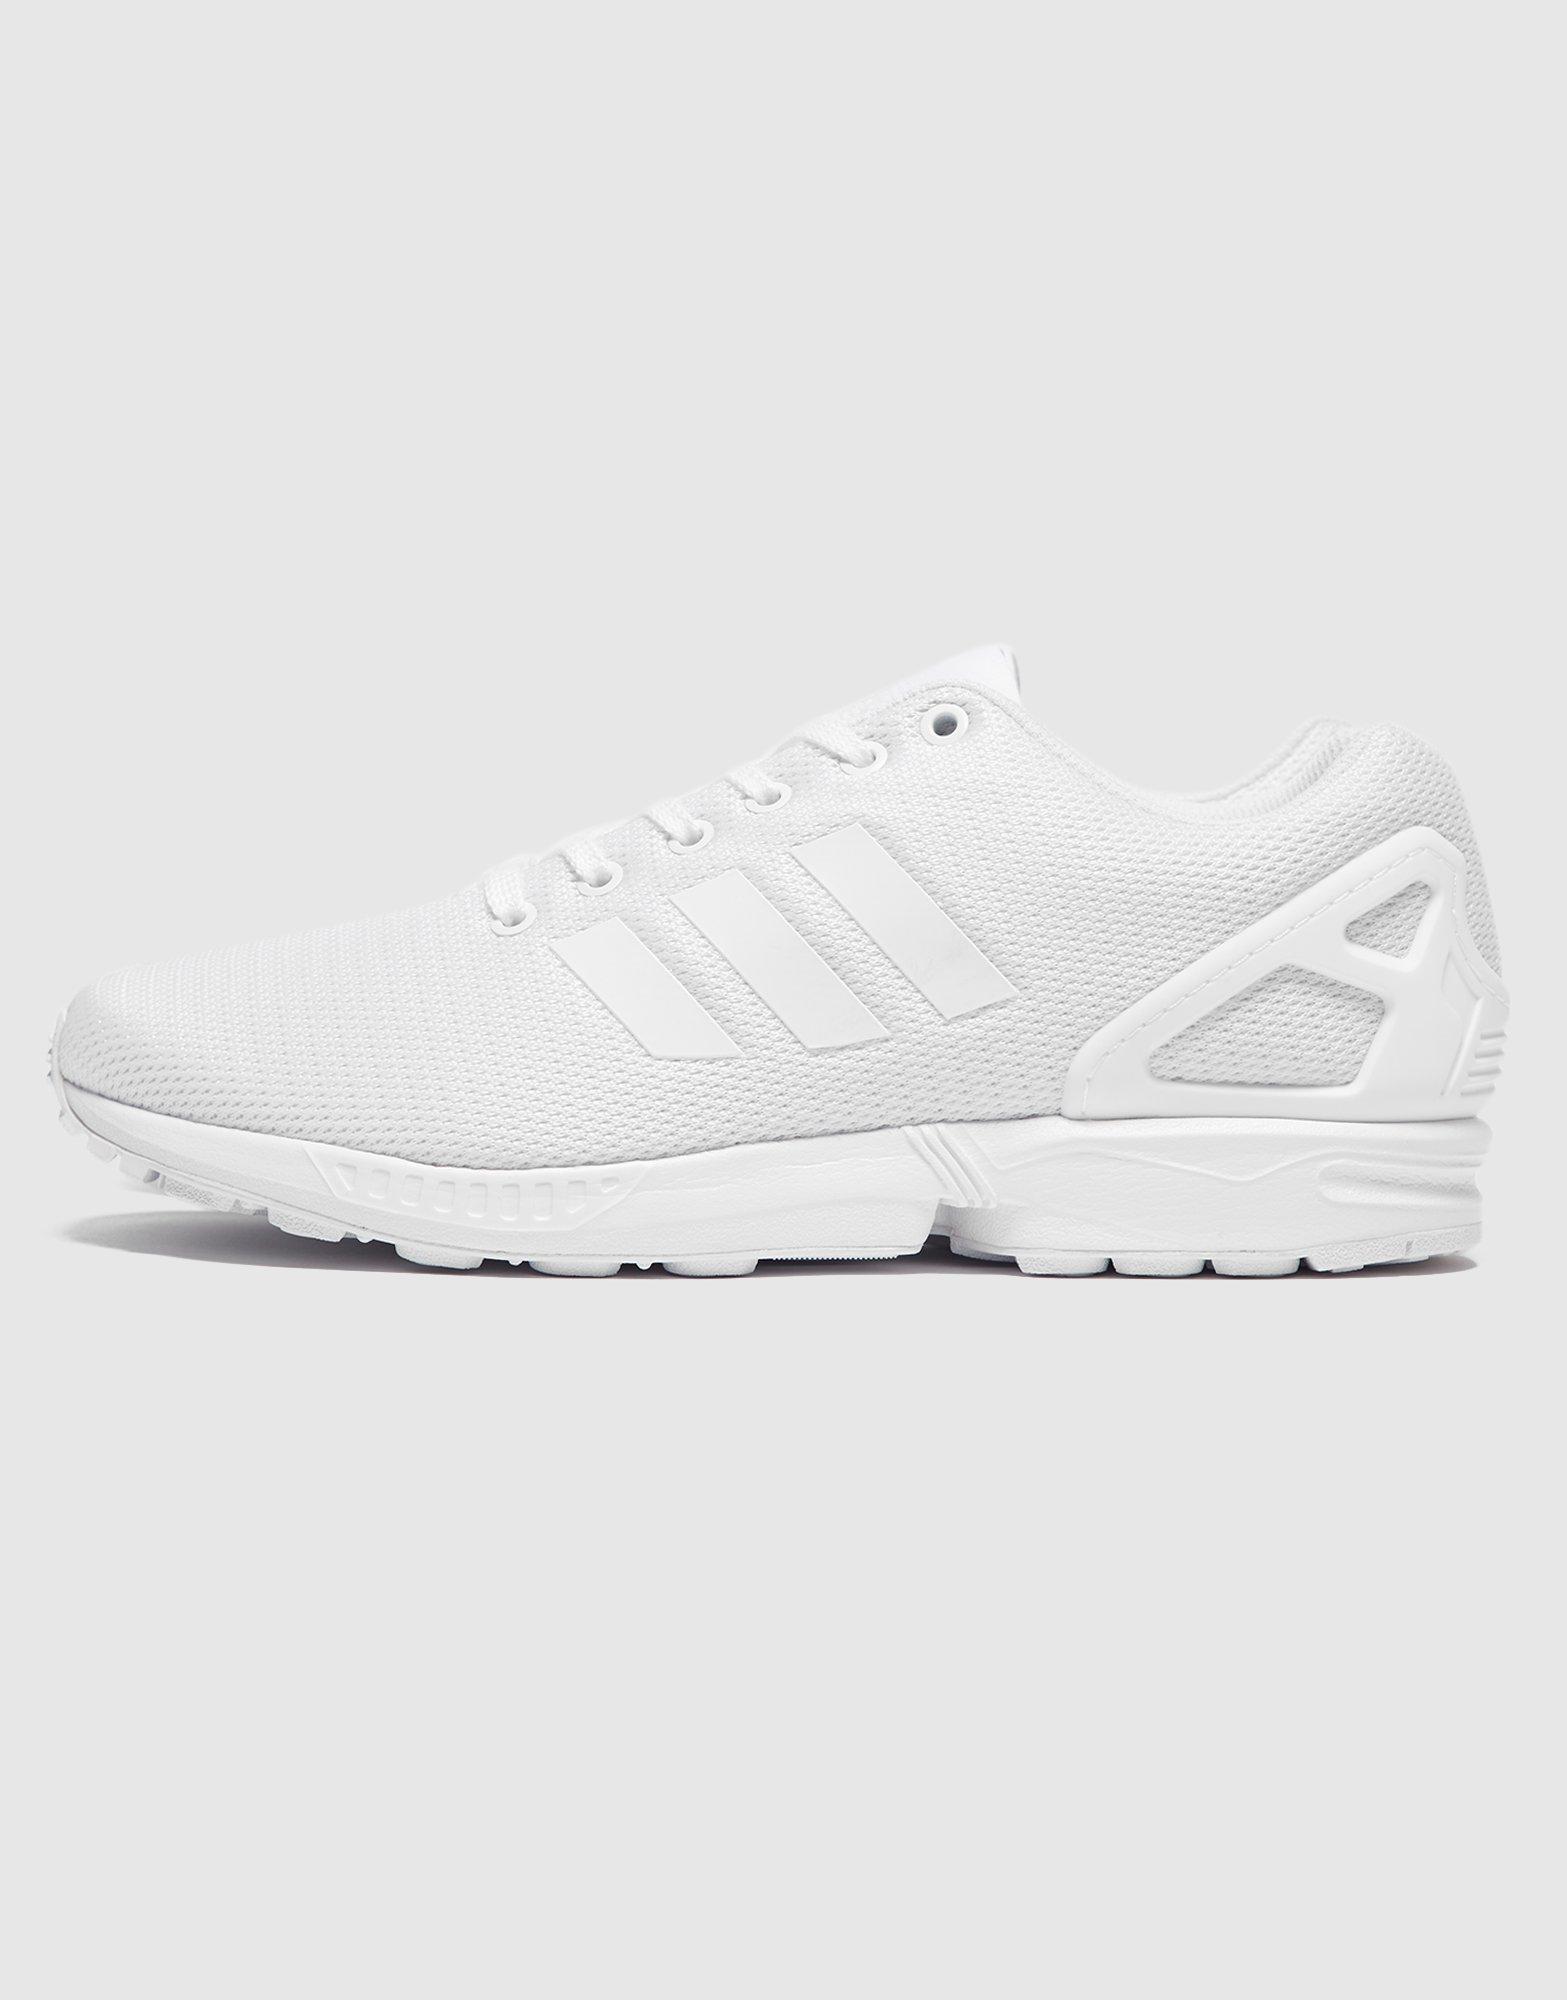 adidas Originals Synthetic Zx Flux in White/White/Light Grey (White) for  Men | Lyst UK